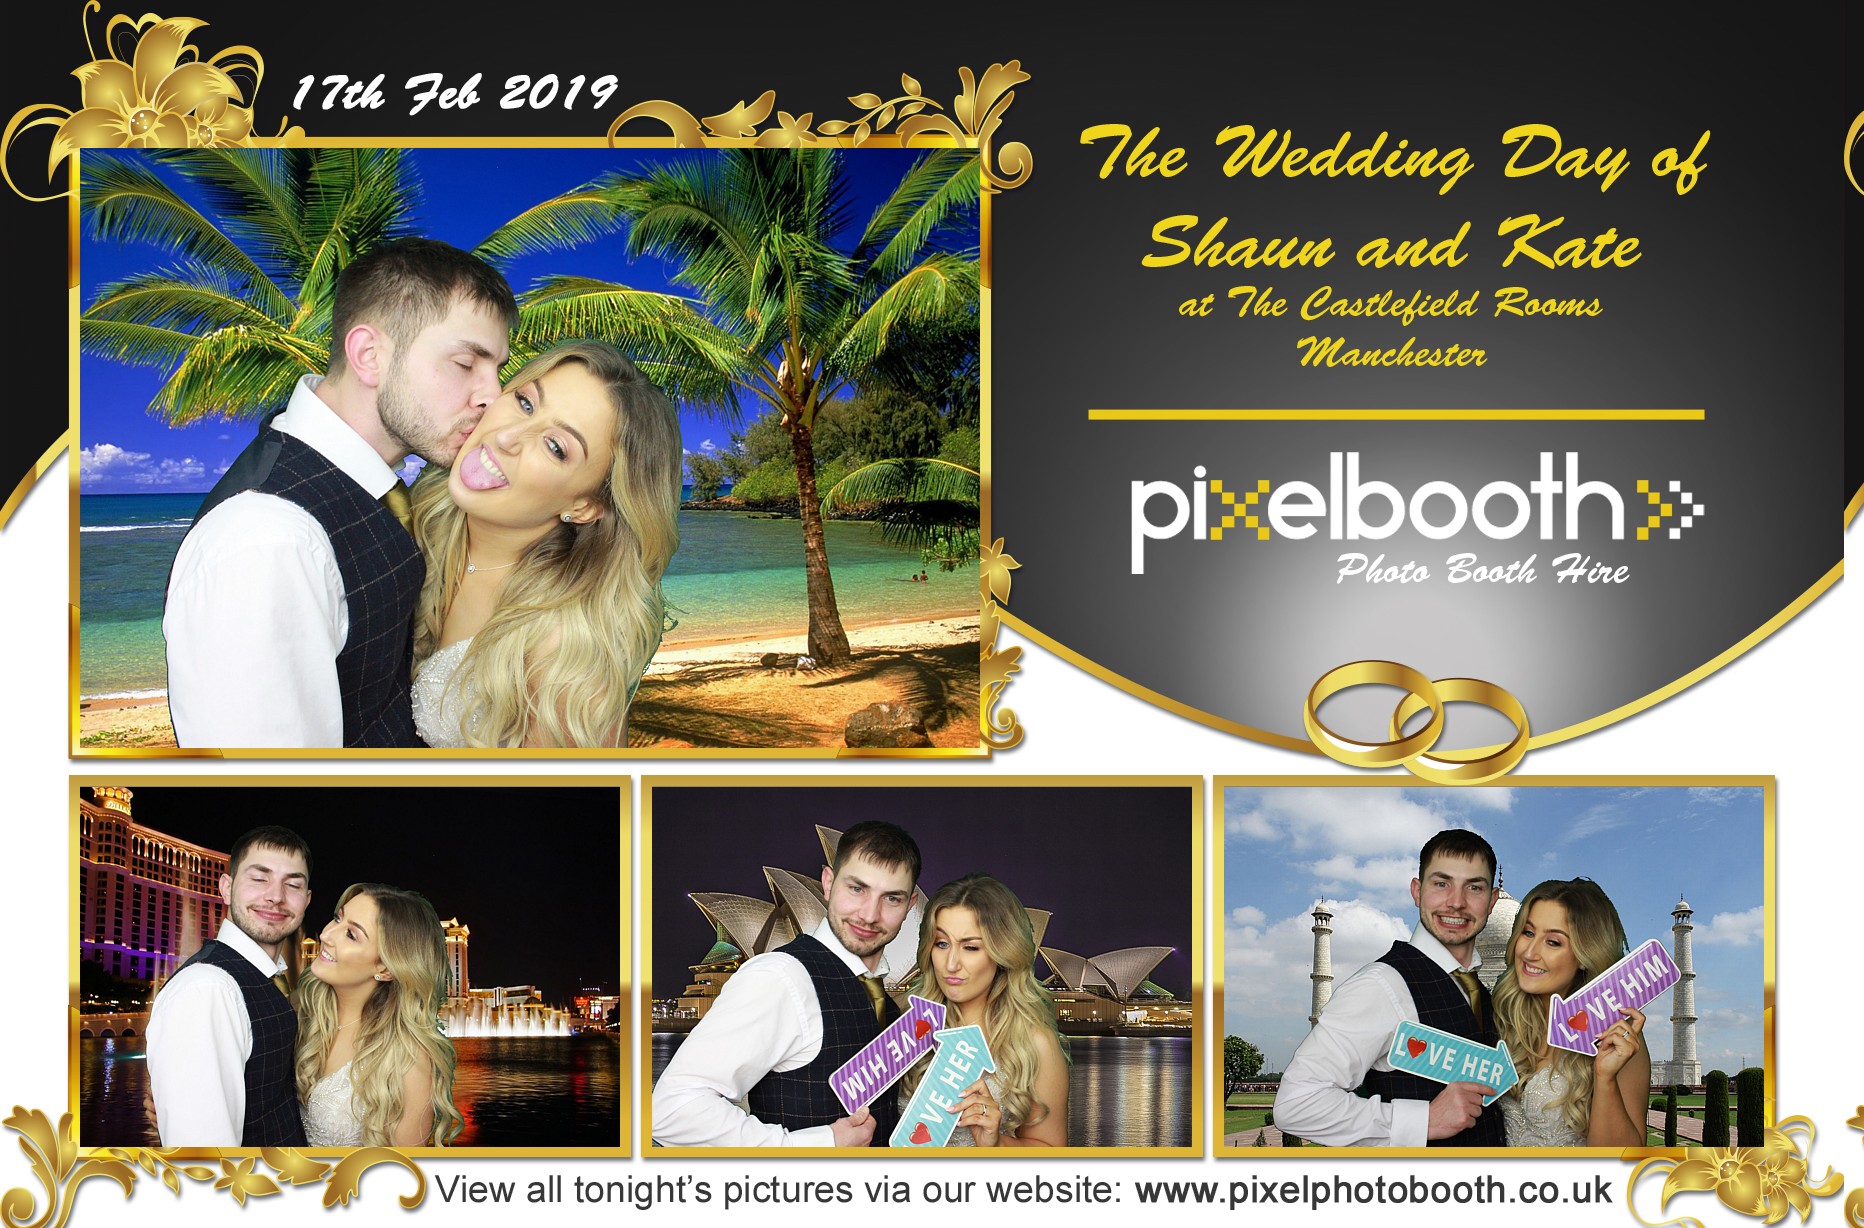 17th Feb 2019: Shaun and Kate's Wedding at The Castlefield Rooms